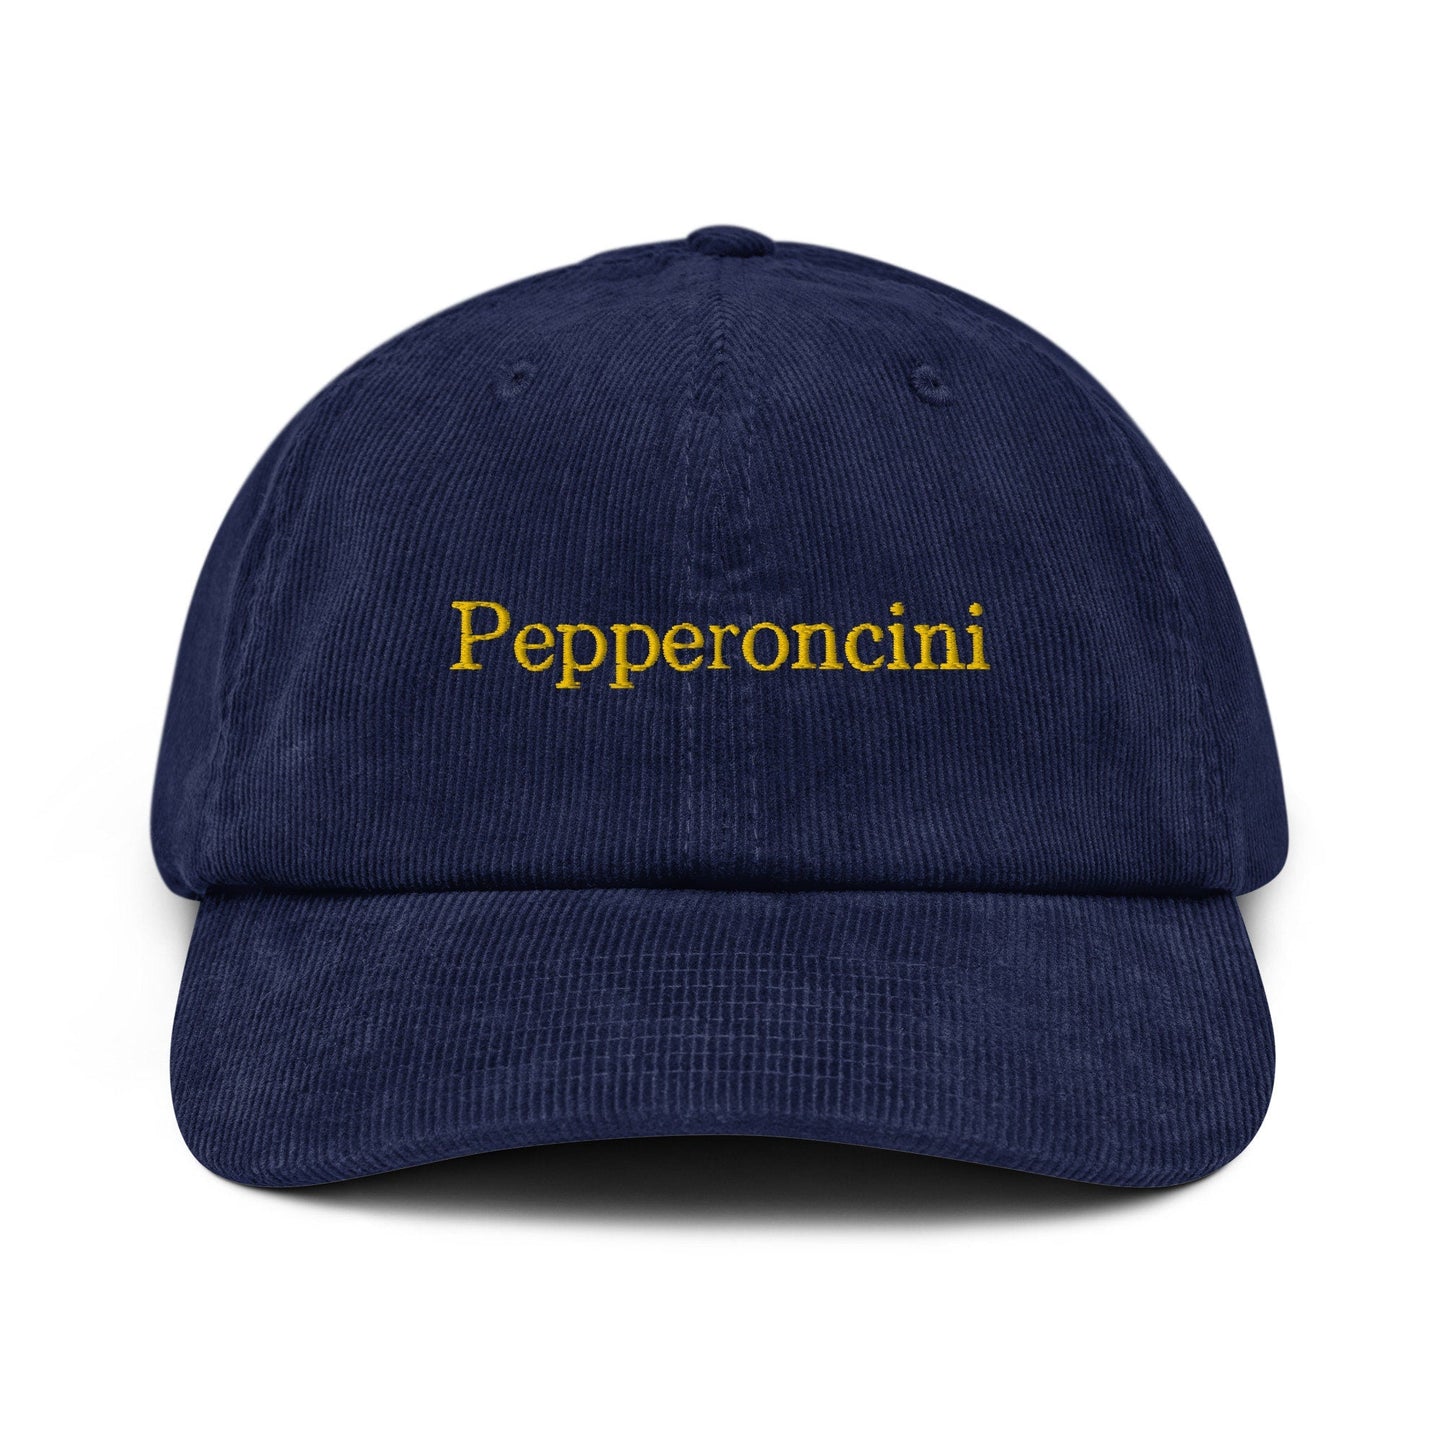 Pepperoncini Corduroy Dad Hat - Gift for Spicy Italian food Lovers - Handmade Embroidered Cap - Evilwater Originals